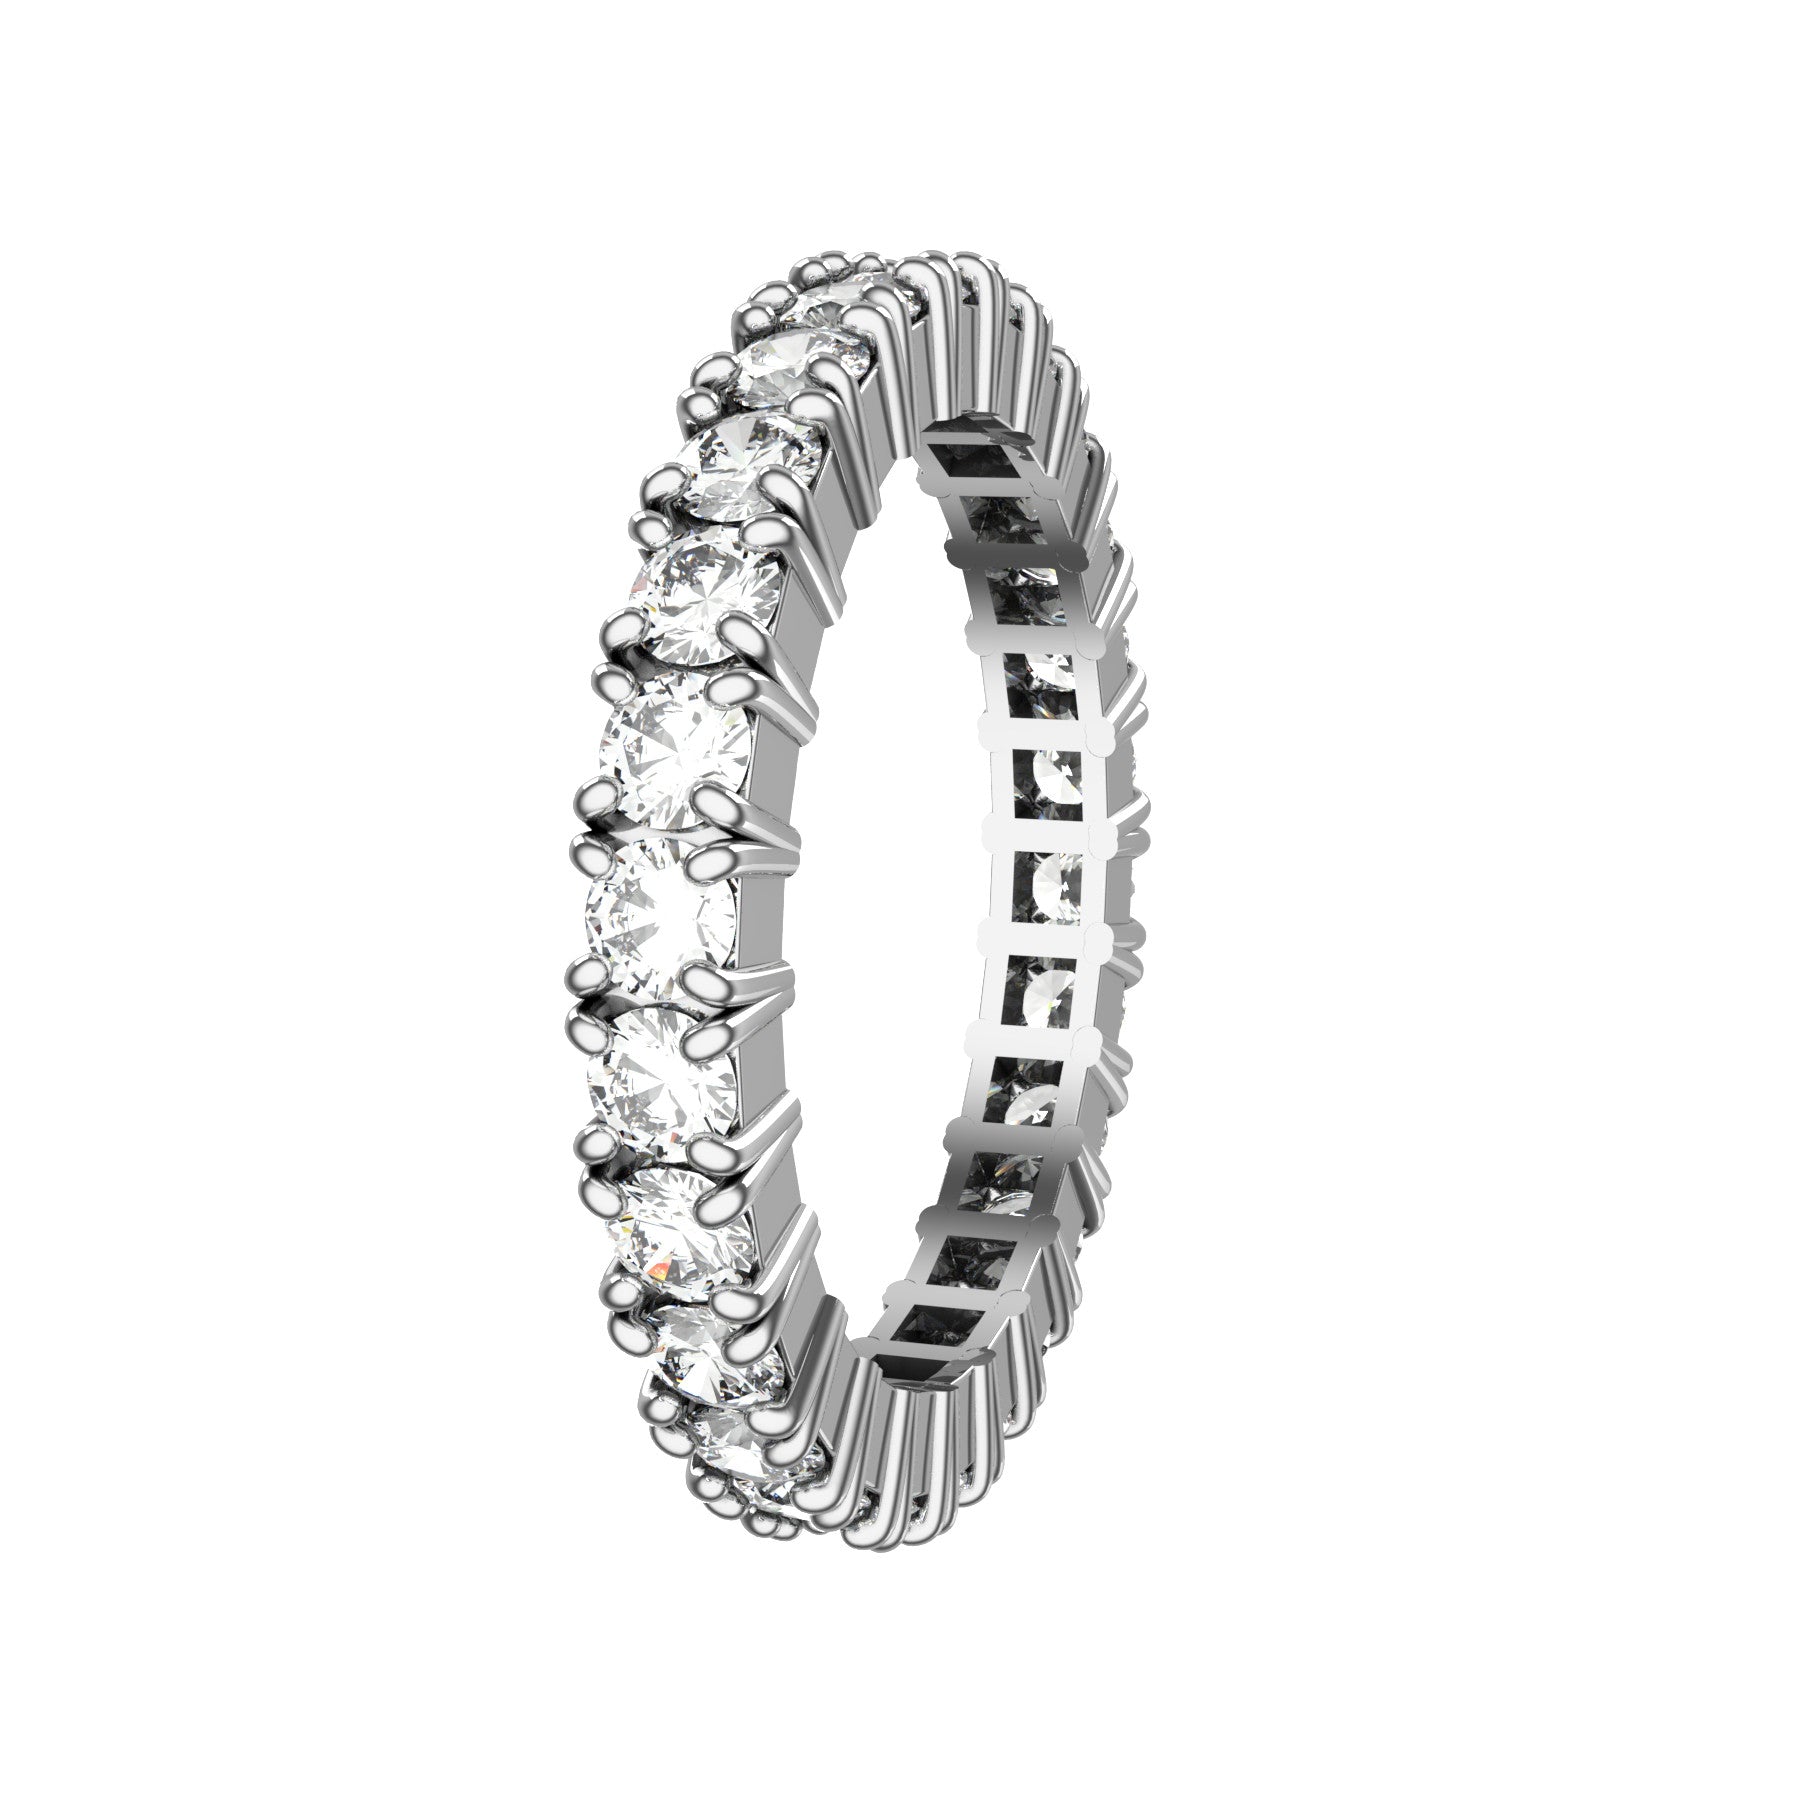 love love wedding band, 18 K white gold, 0,05 ct round natural diamonds, weight about 3,1 g. (0.11 oz), width 2,4 mm